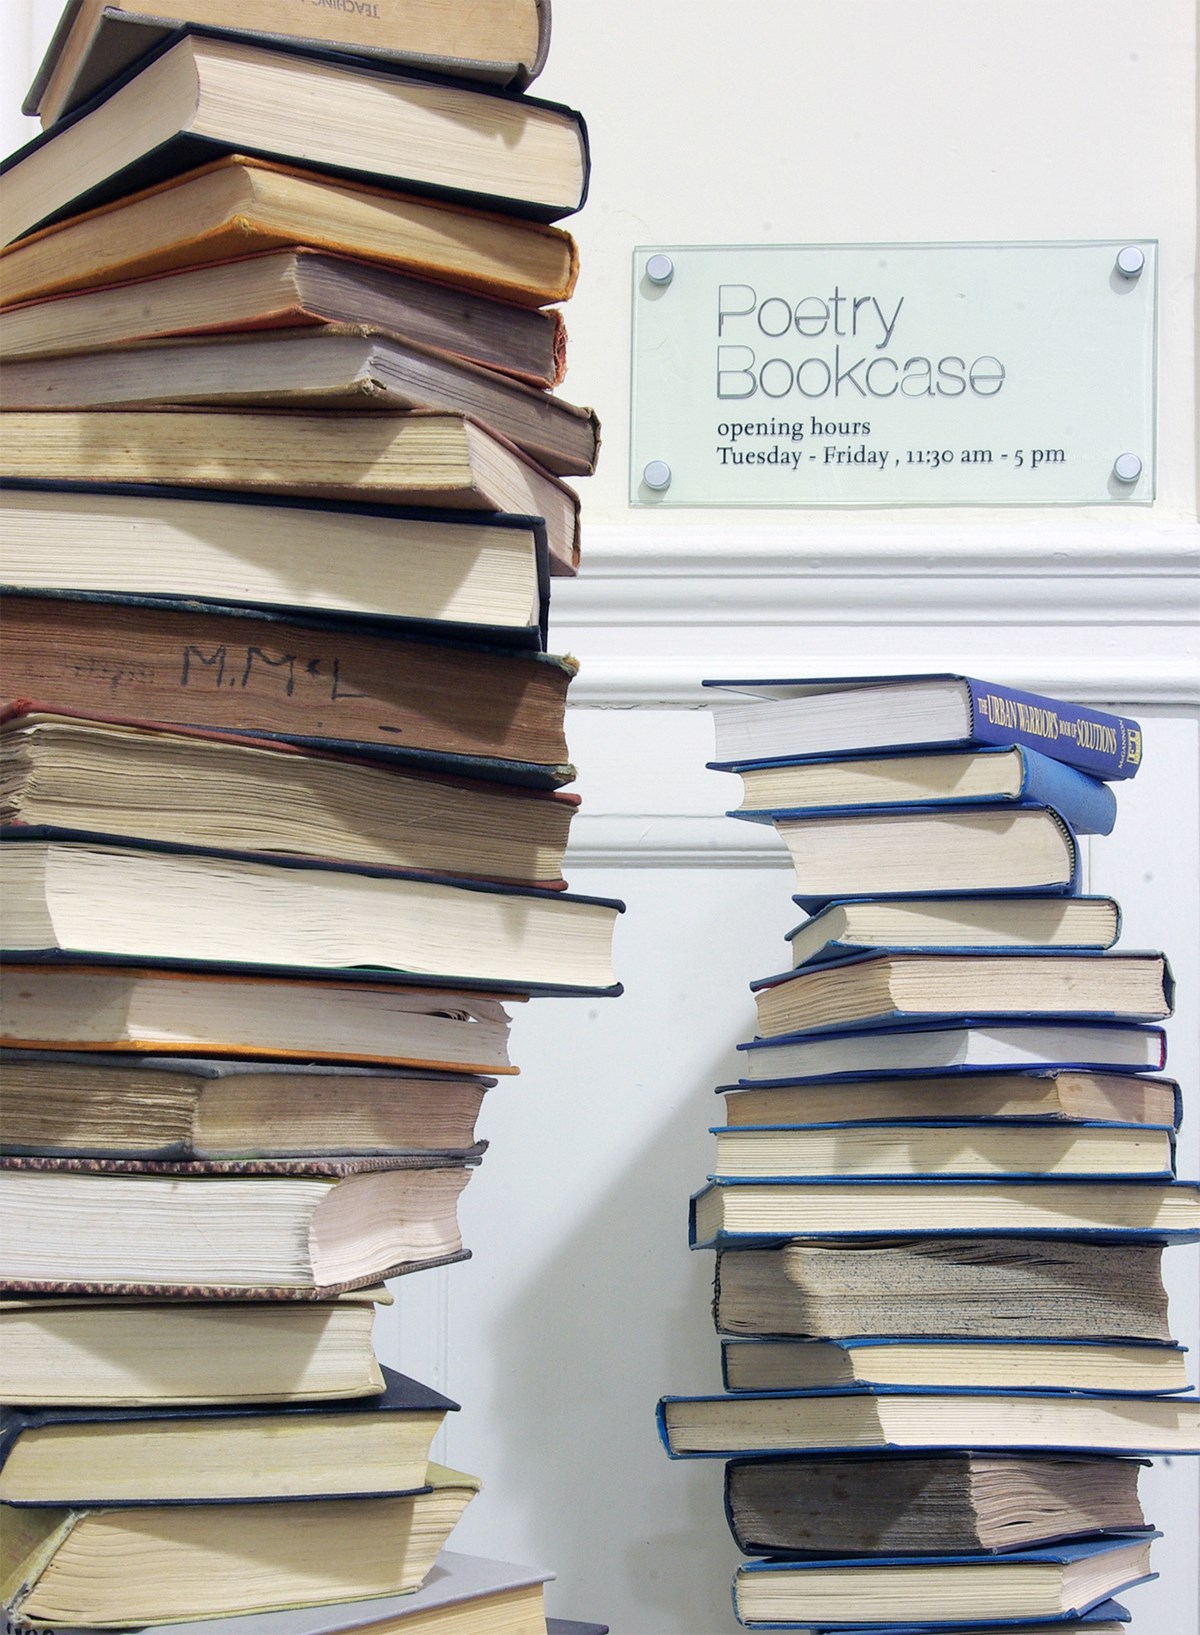 “Litfest's Poetry Bookcase” by Lancaster Litfest is licensed under CC BY 2.0